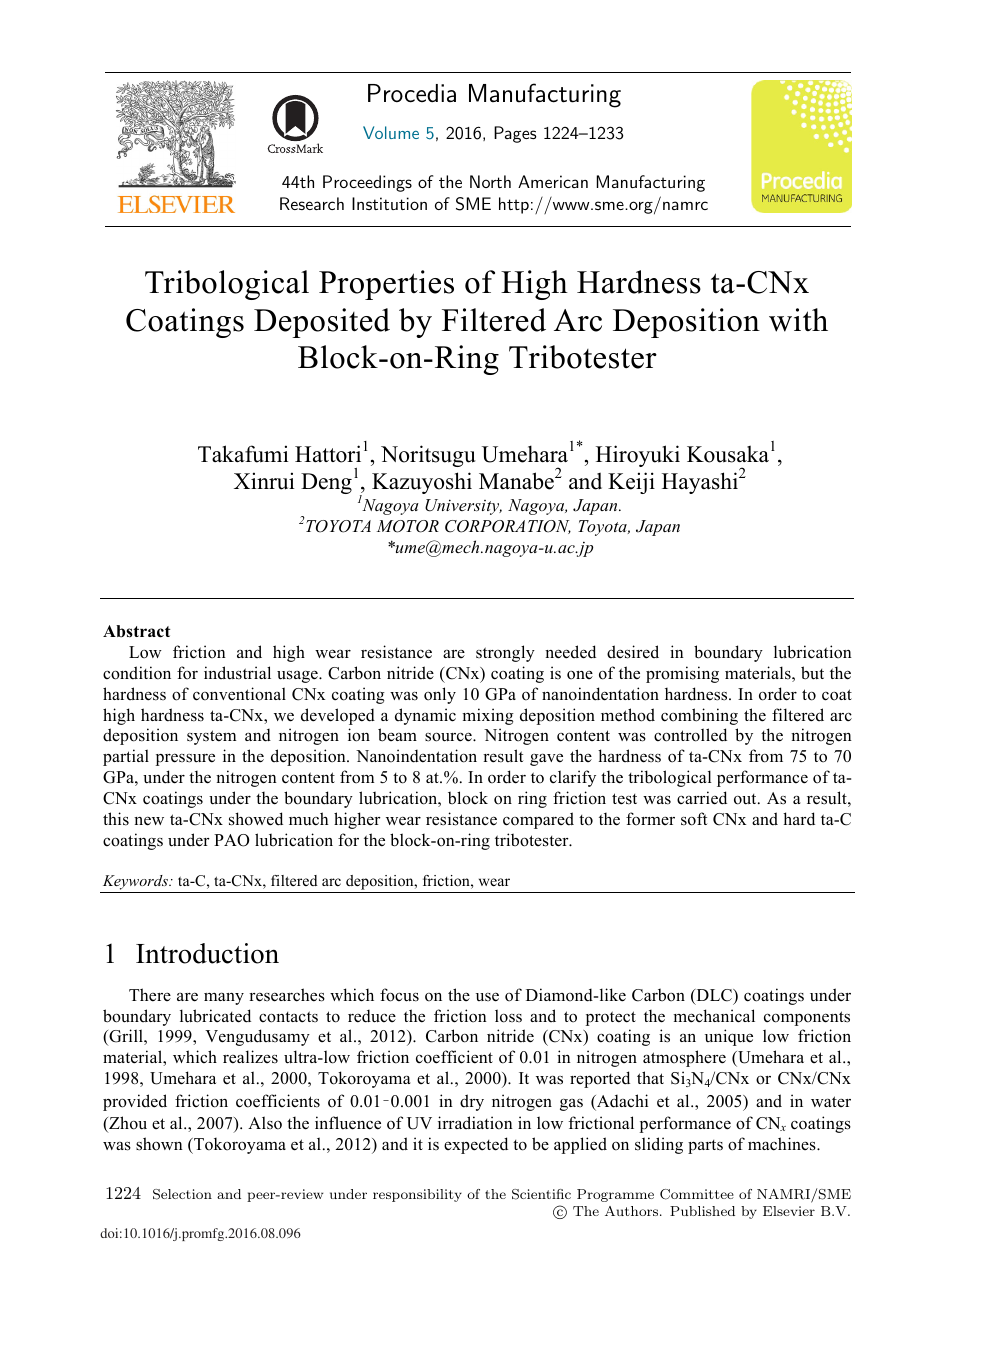 Tribological Properties Of High Hardness Ta Cnx Coatings Deposited By Filtered Arc Deposition With Block On Ring Tribotester Topic Of Research Paper In Materials Engineering Download Scholarly Article Pdf And Read For Free On